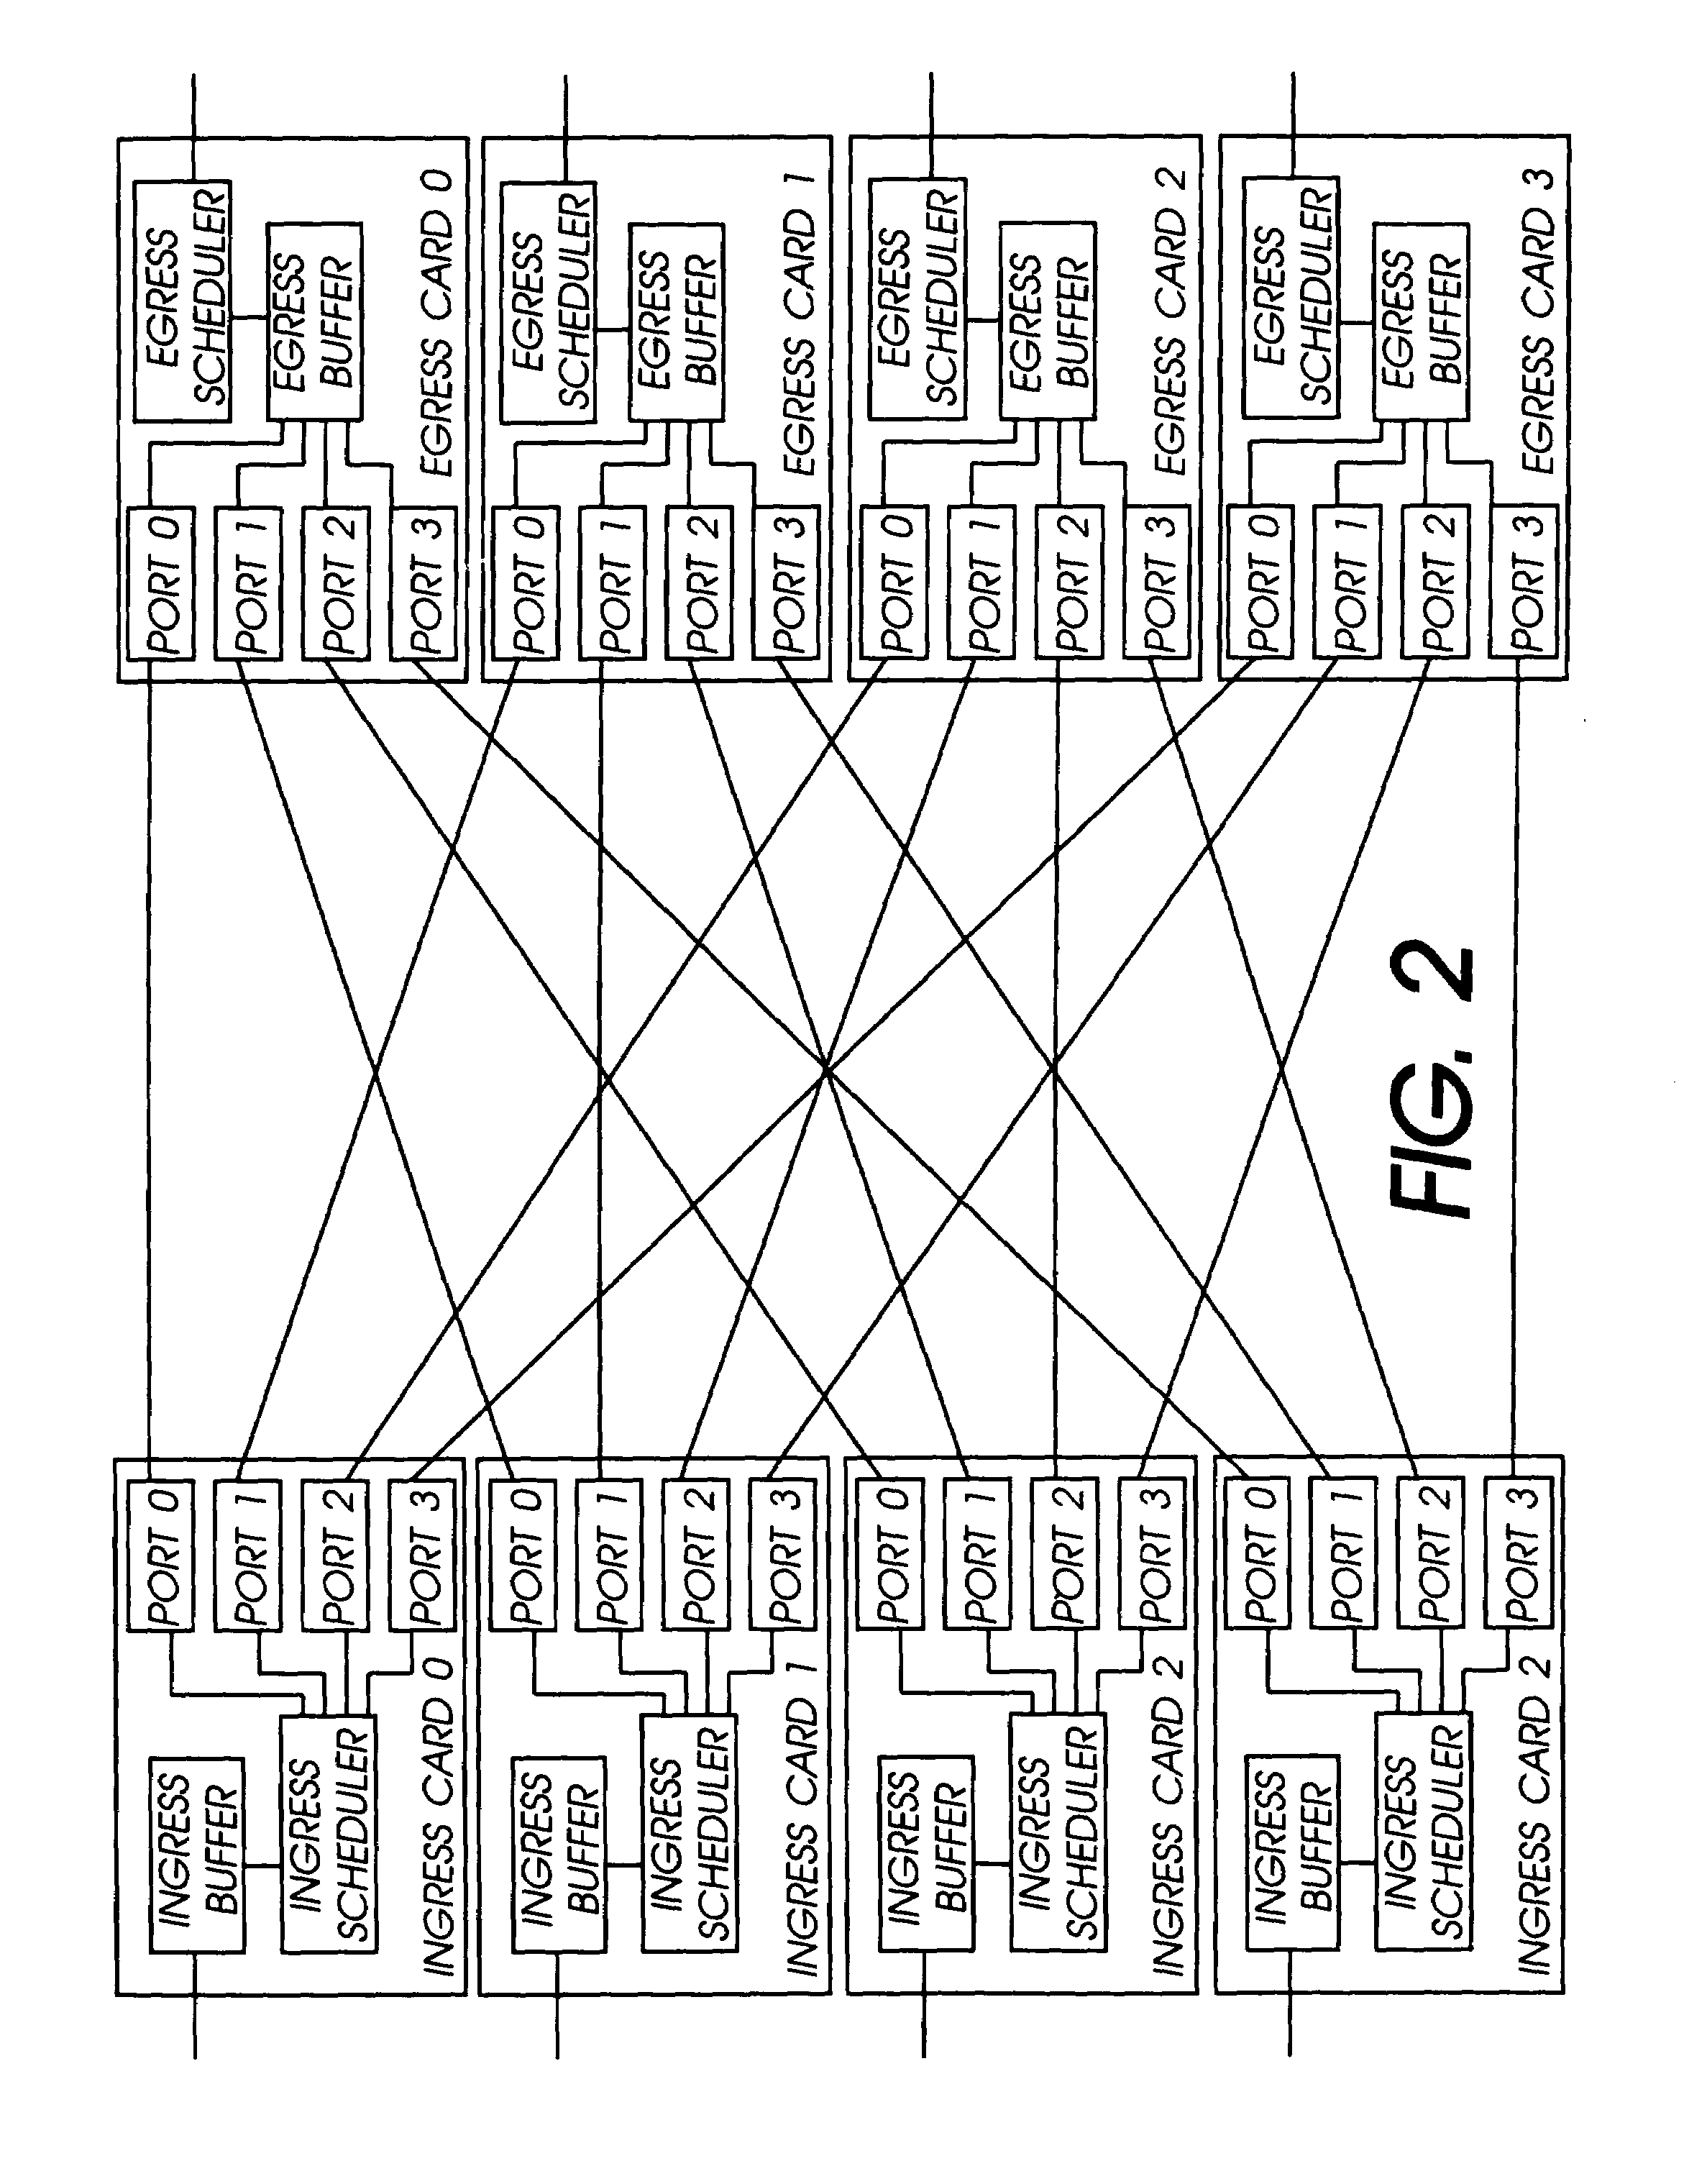 Distributed control of data flow in a network switch